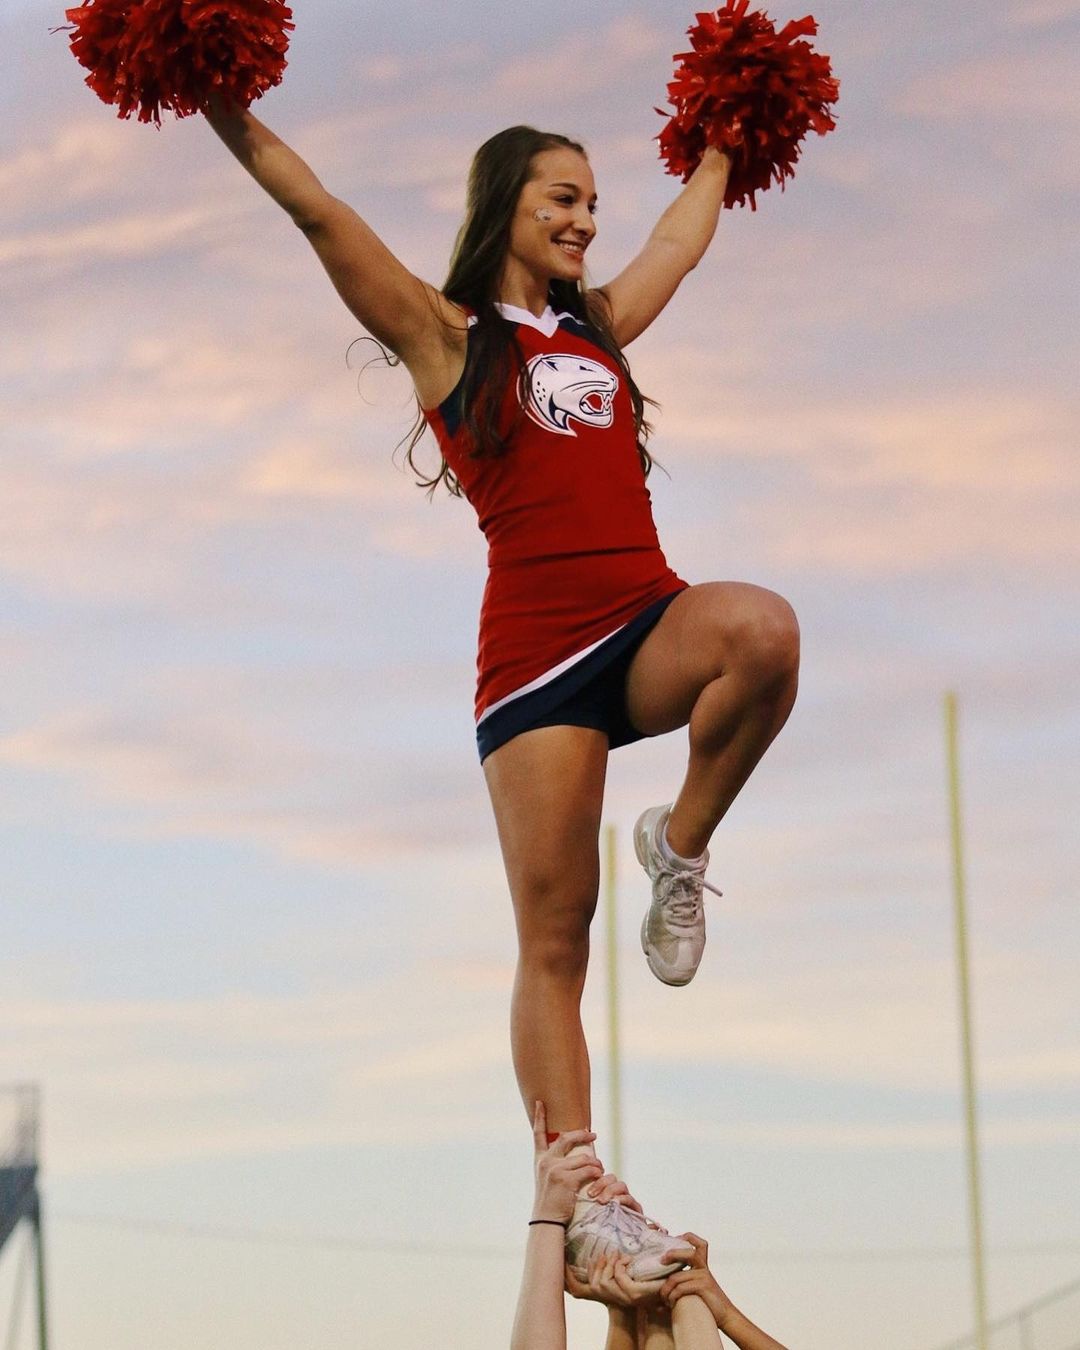 Aly Kitchens During Her Cheerleading Days At USA